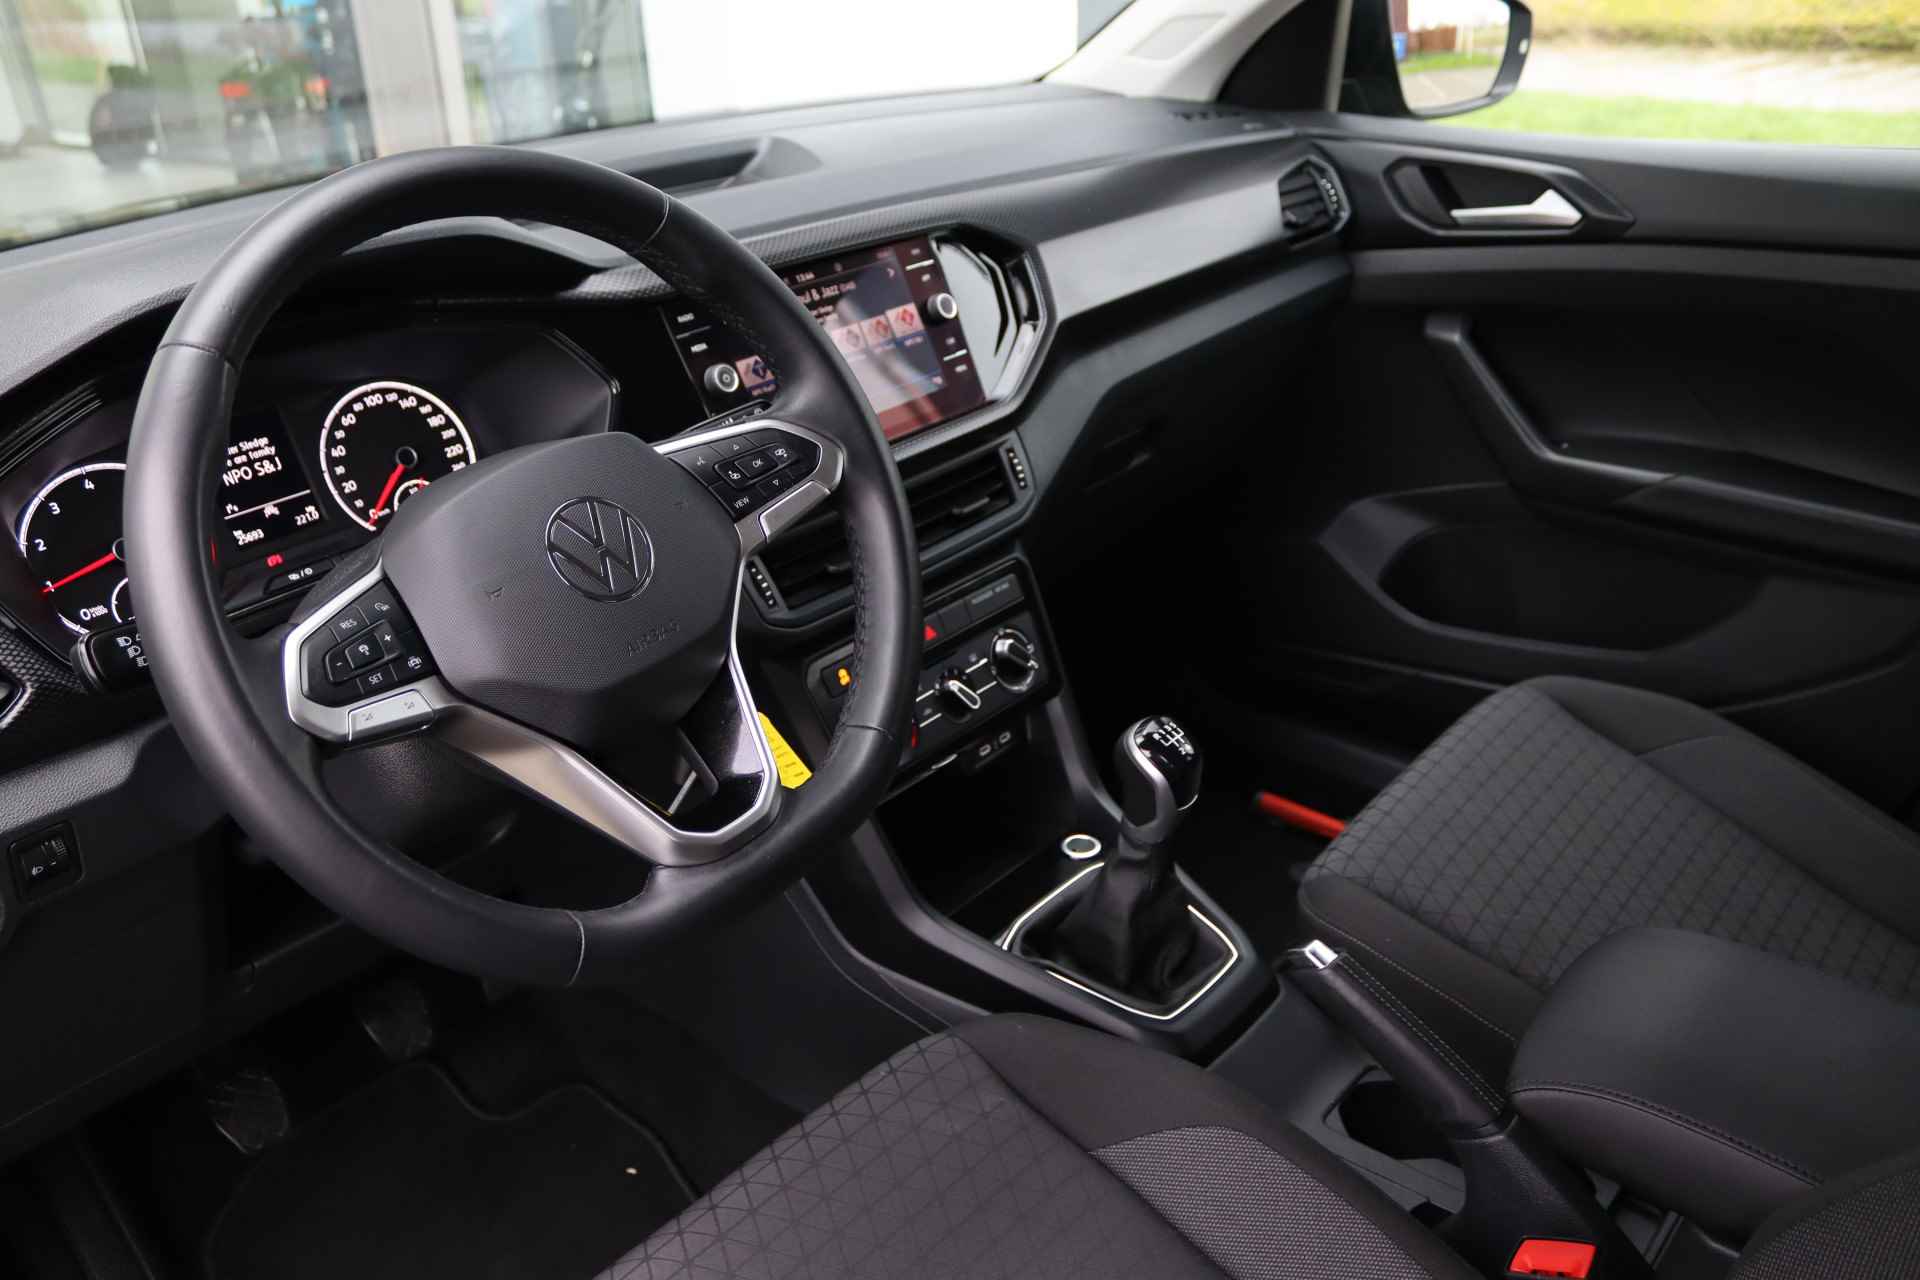 Volkswagen T-Cross 1.0 TSI 95pk Life | App-connect  | PDC voor & achter | 16" LM | Adaptive Cruise - 14/38